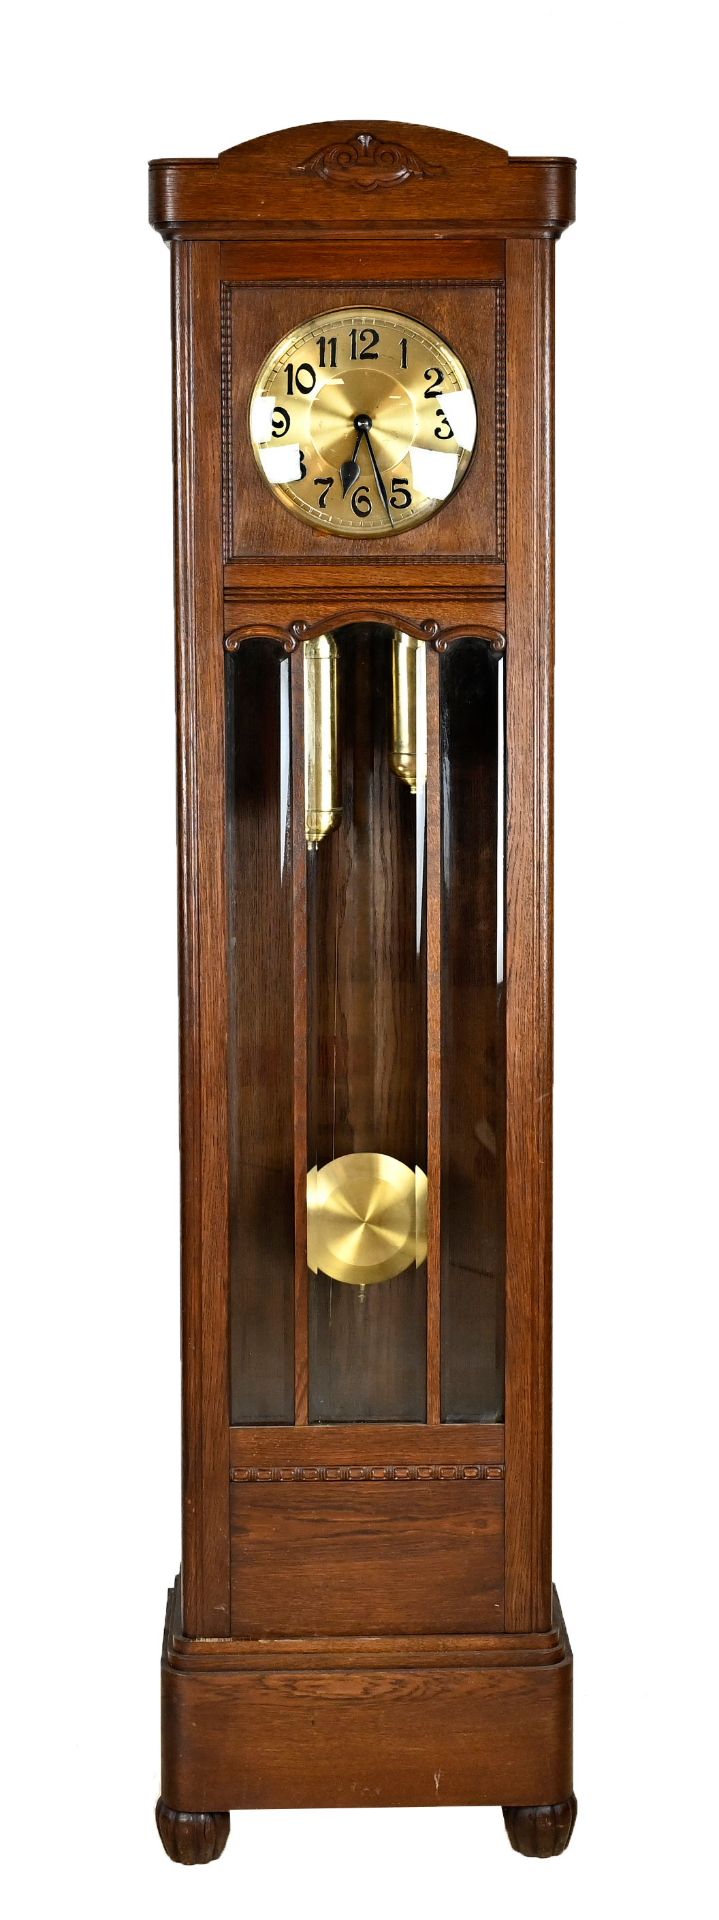 Grandfather clock, German circa 1910, oak, with perlage and carvings, gold dial with black arab.